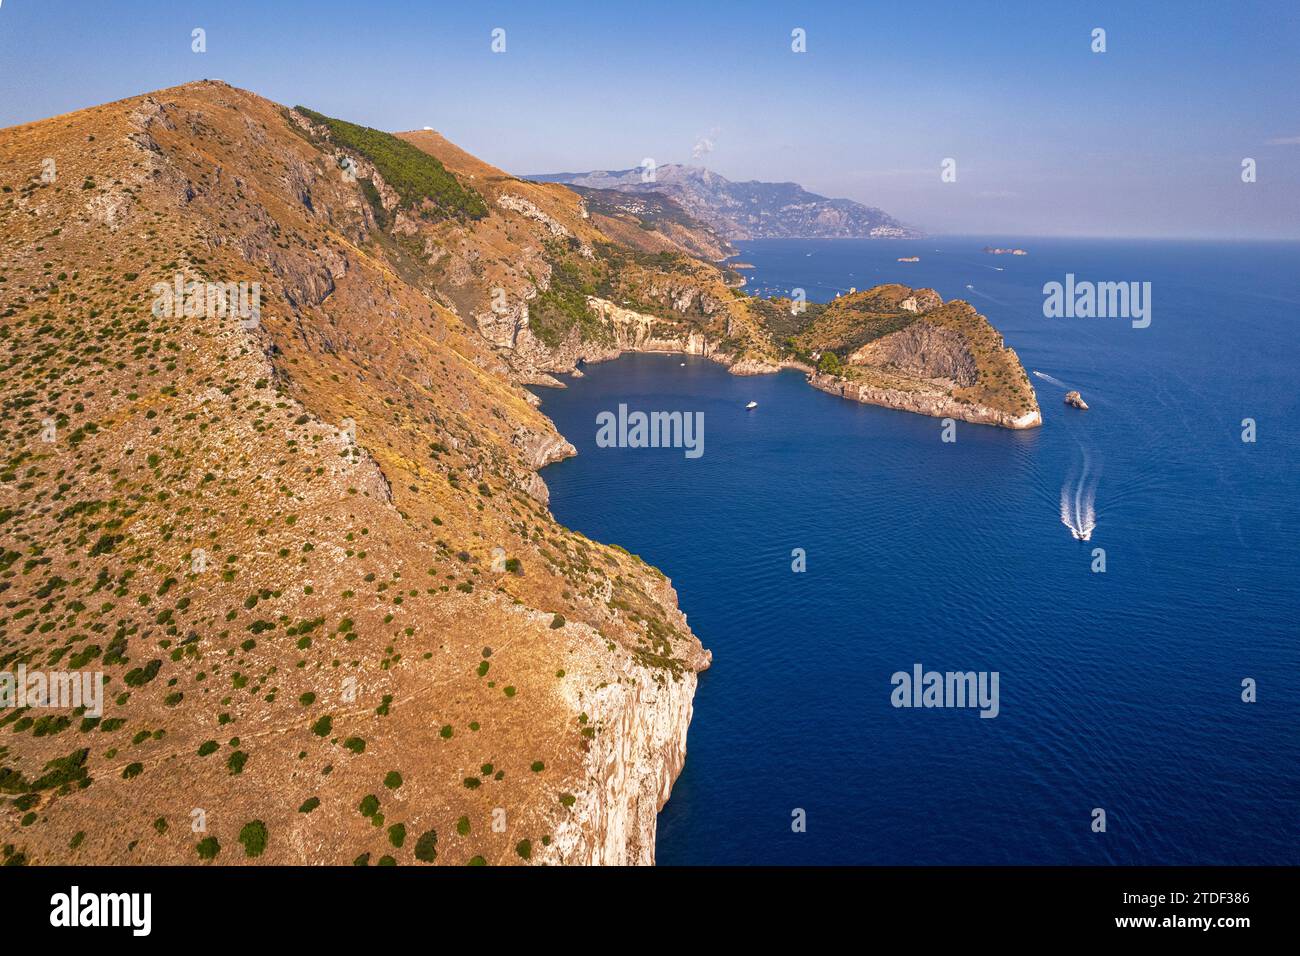 Rocky rugged shore of Amalfi coast with Ieranto bay in the foreground, aerial view, Naples province, Campania region, Tyrrhenian Sea, South of Italy Stock Photo